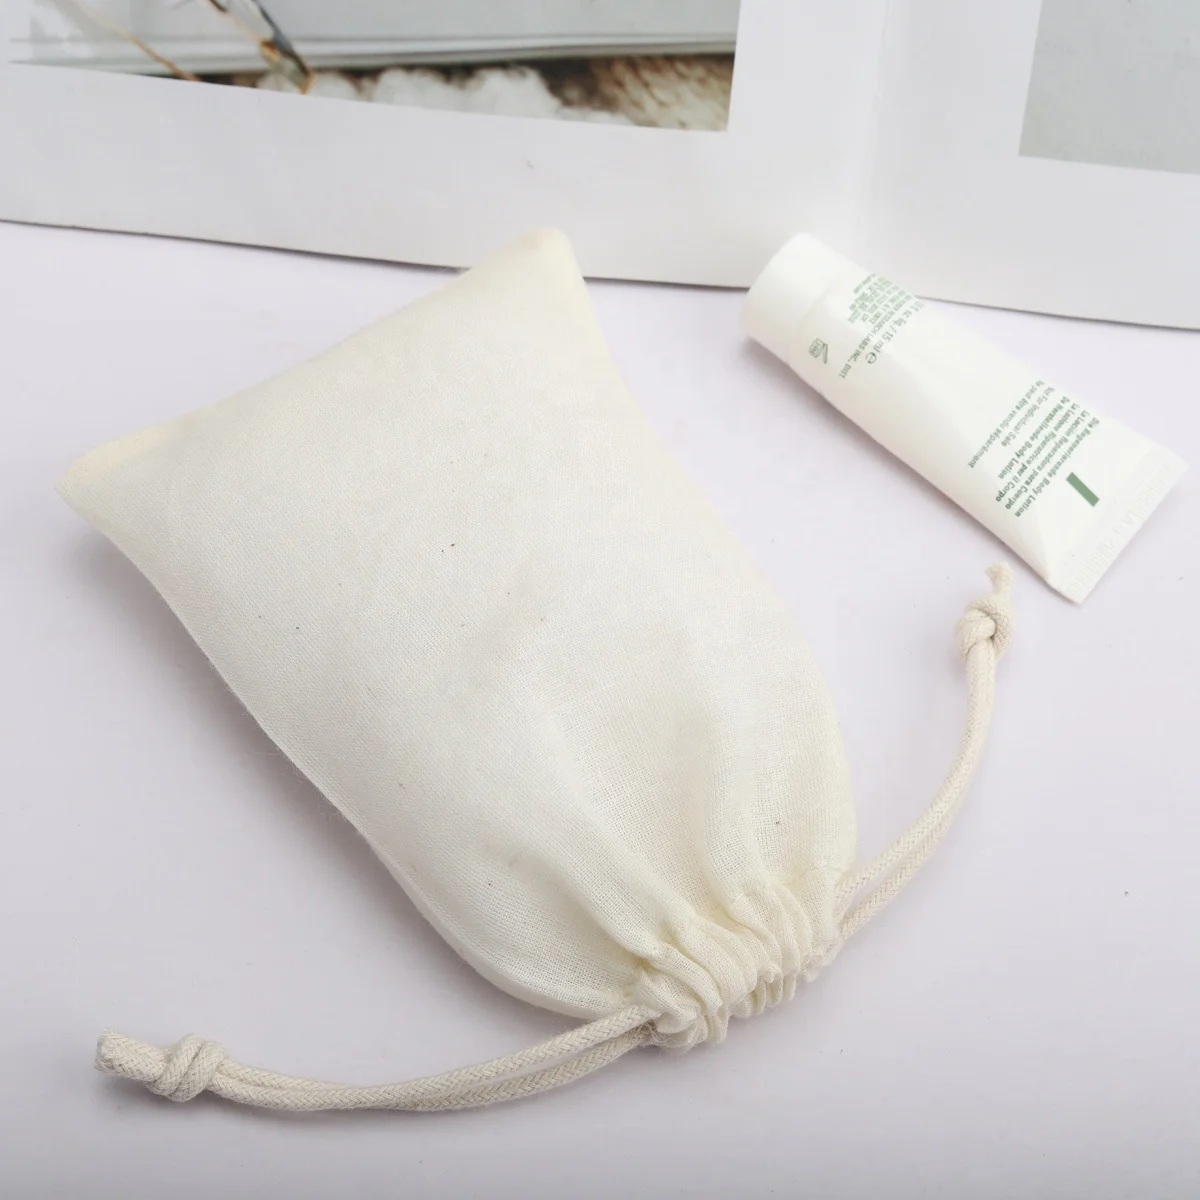 Reusable Thin Cotton Drawstring Tea Aromatherapy Candle Packing Drawstring Bag High Quality Gift Storage Muslin Pouch